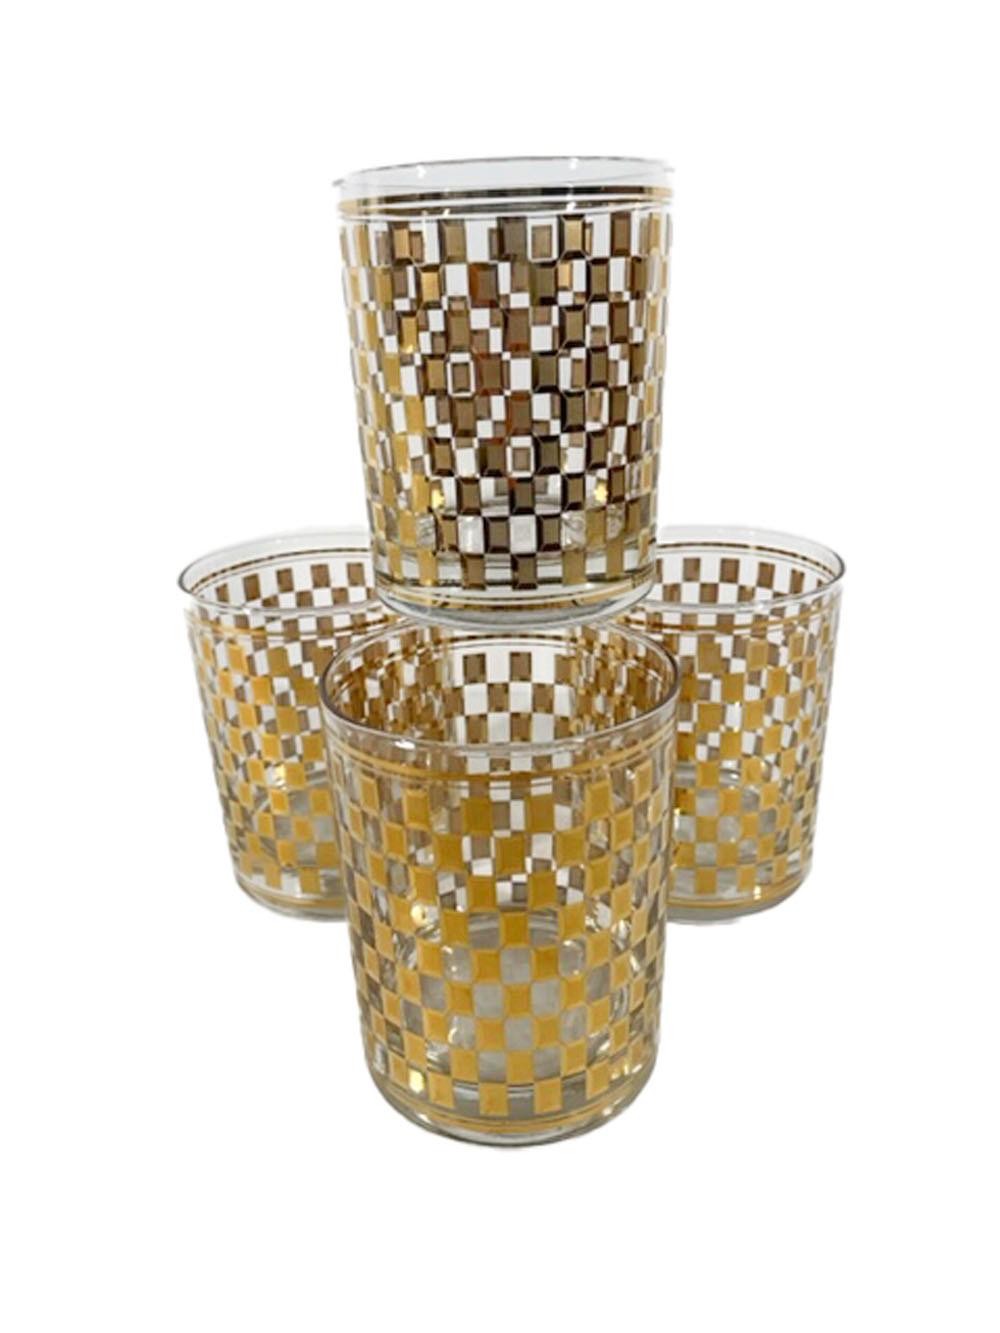 Four double rocks glasses by Culver, LTD with a checkerboard design made of vertical rectangles touching at the corners and having burnished edges framing satin finished centers.